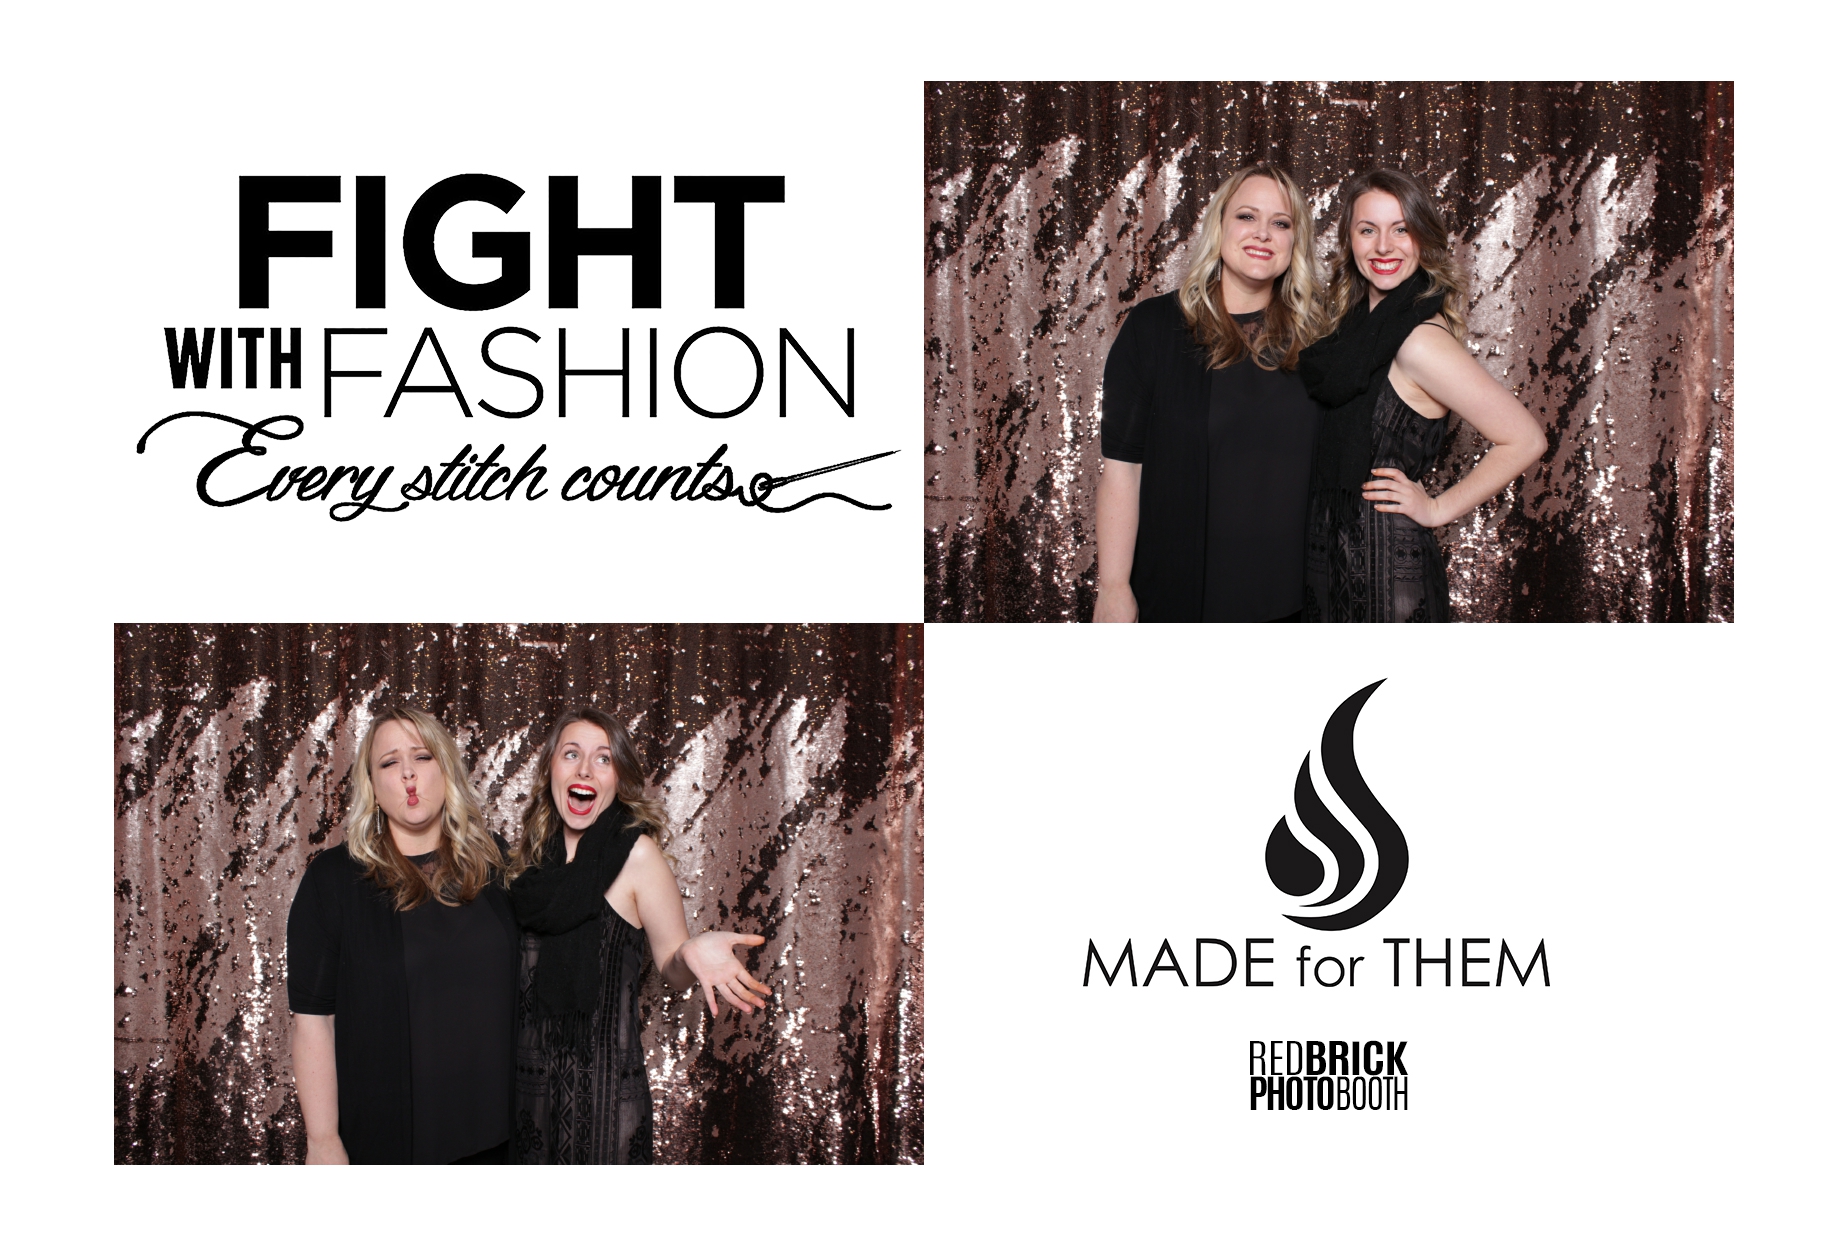 ladies in fresno photo booth at fight with fashion